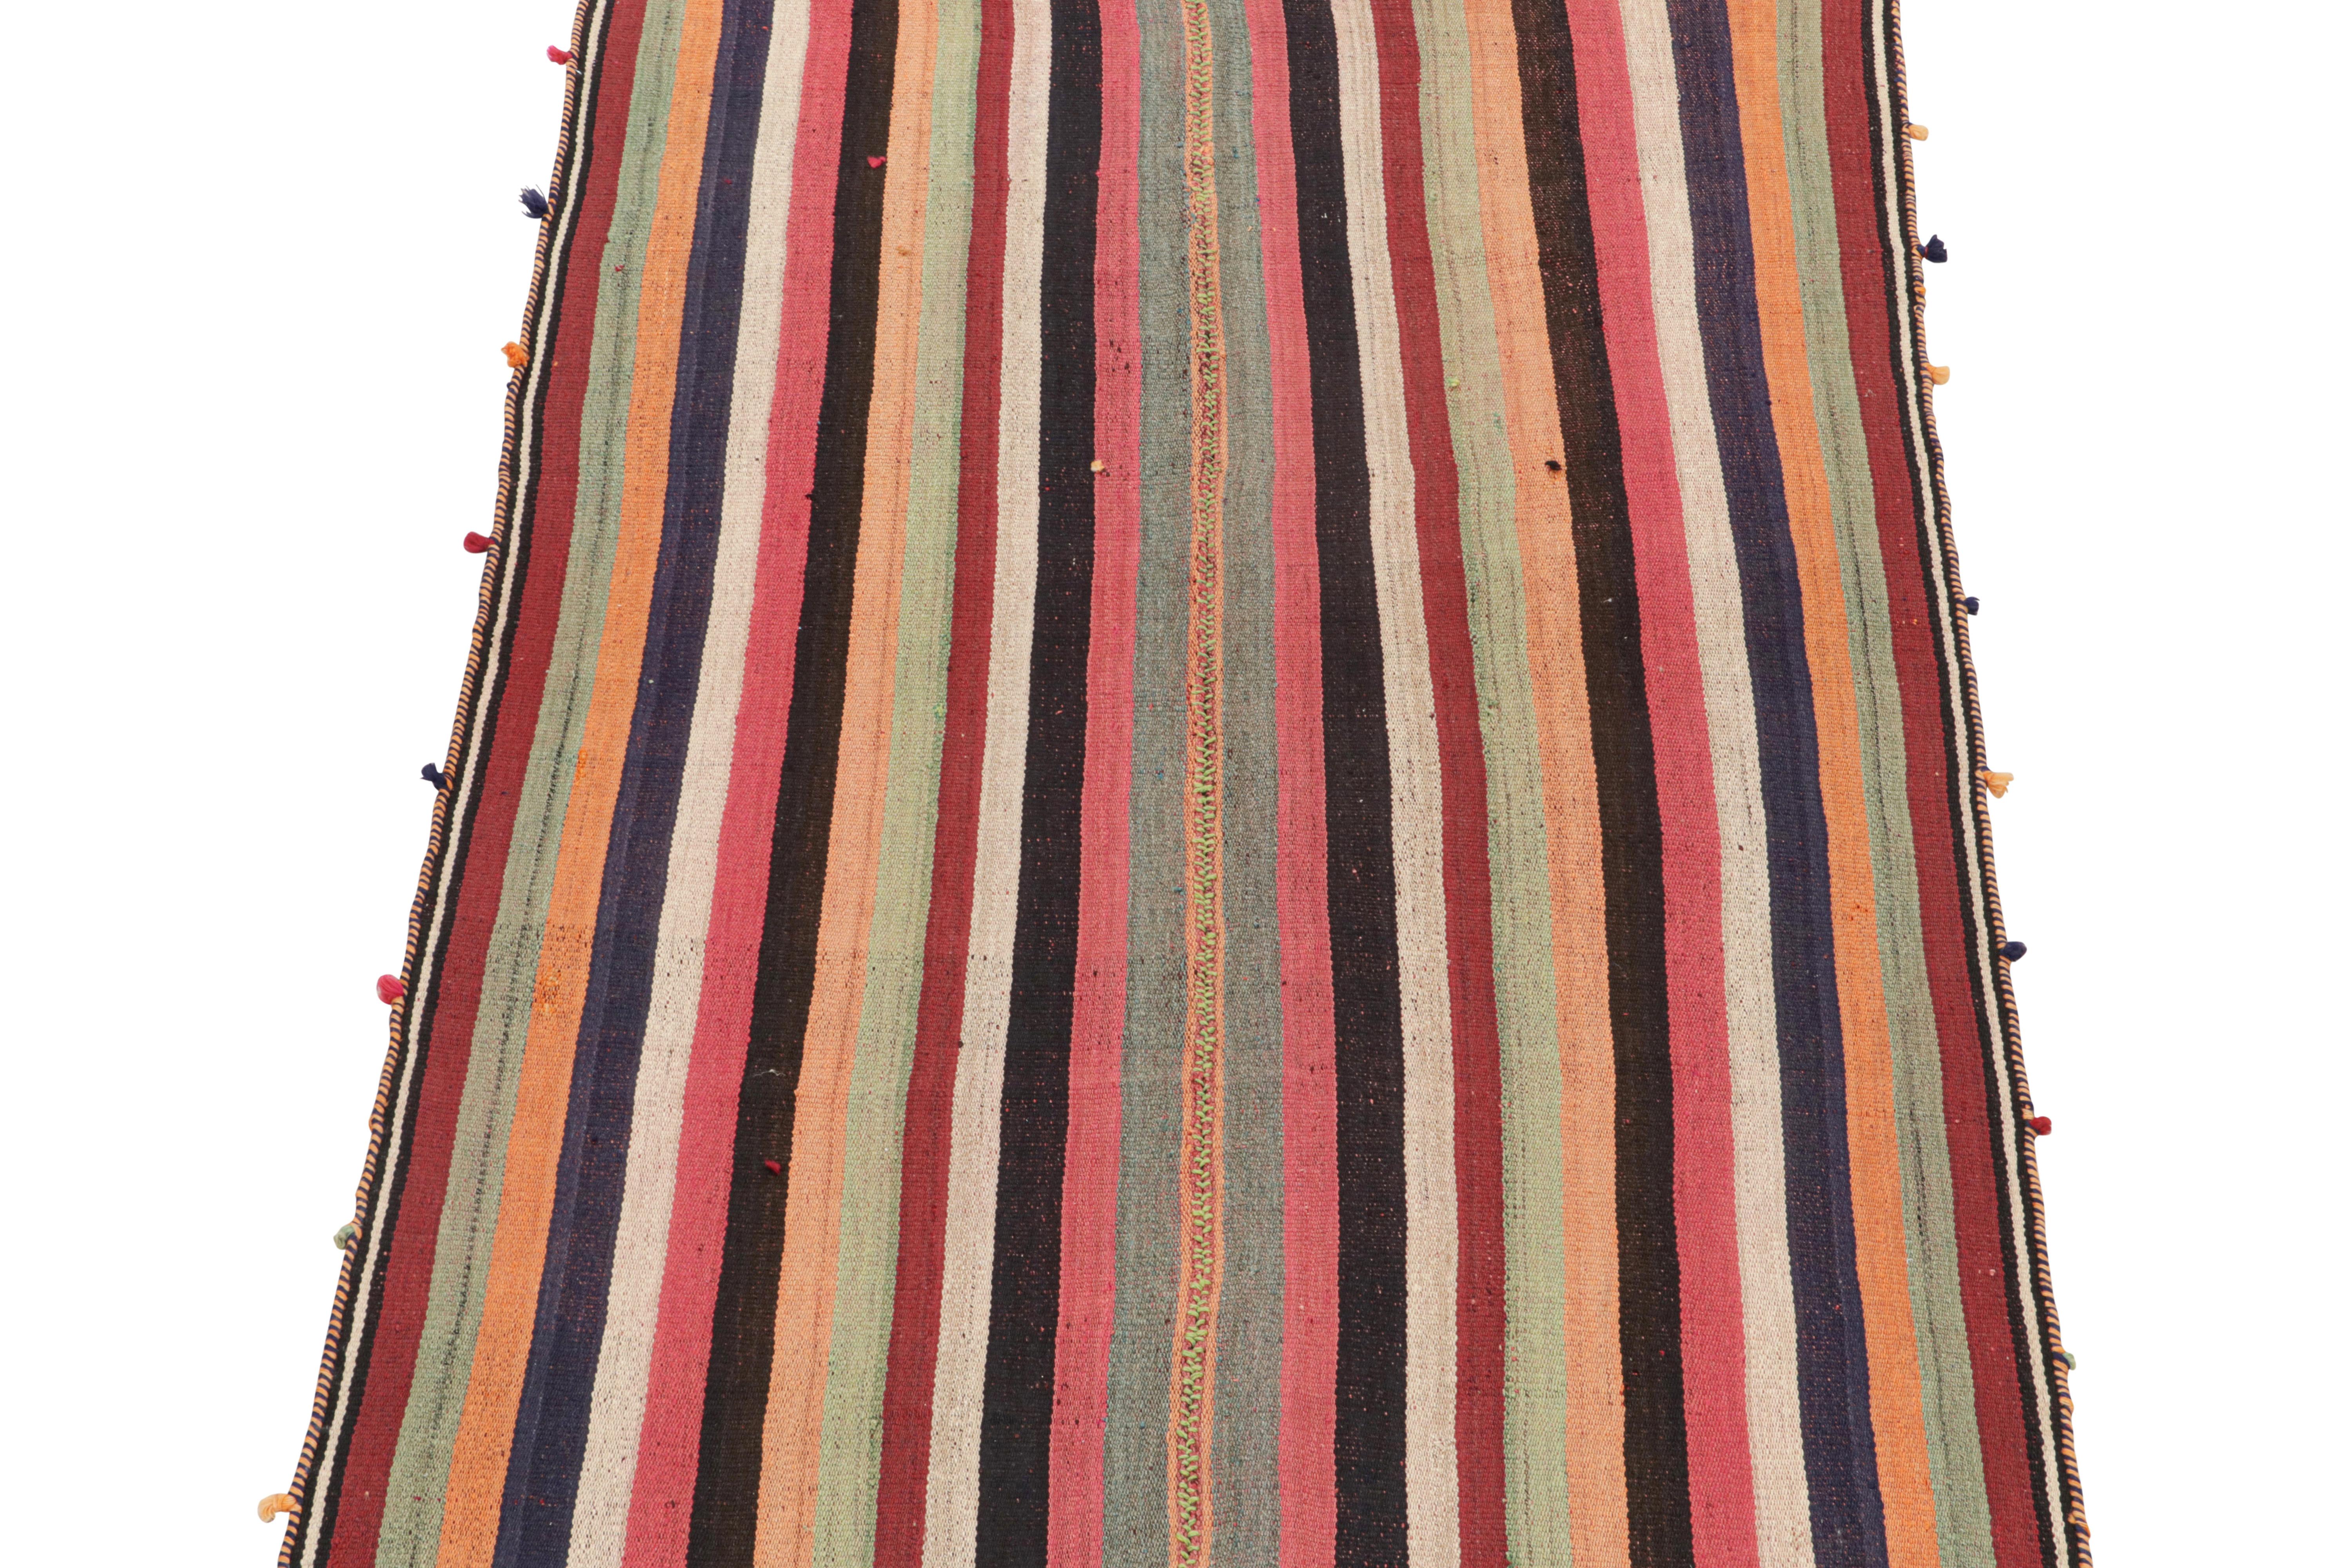 This vintage 5x7 Persian Kilim is a rare midcentury tribal rug, handwoven in wool circa 1950-1960. 

Its design most likely represents a Jajim-style Kilim–a flat-weaving technique in which multiple pieces are combined into one. This creates the